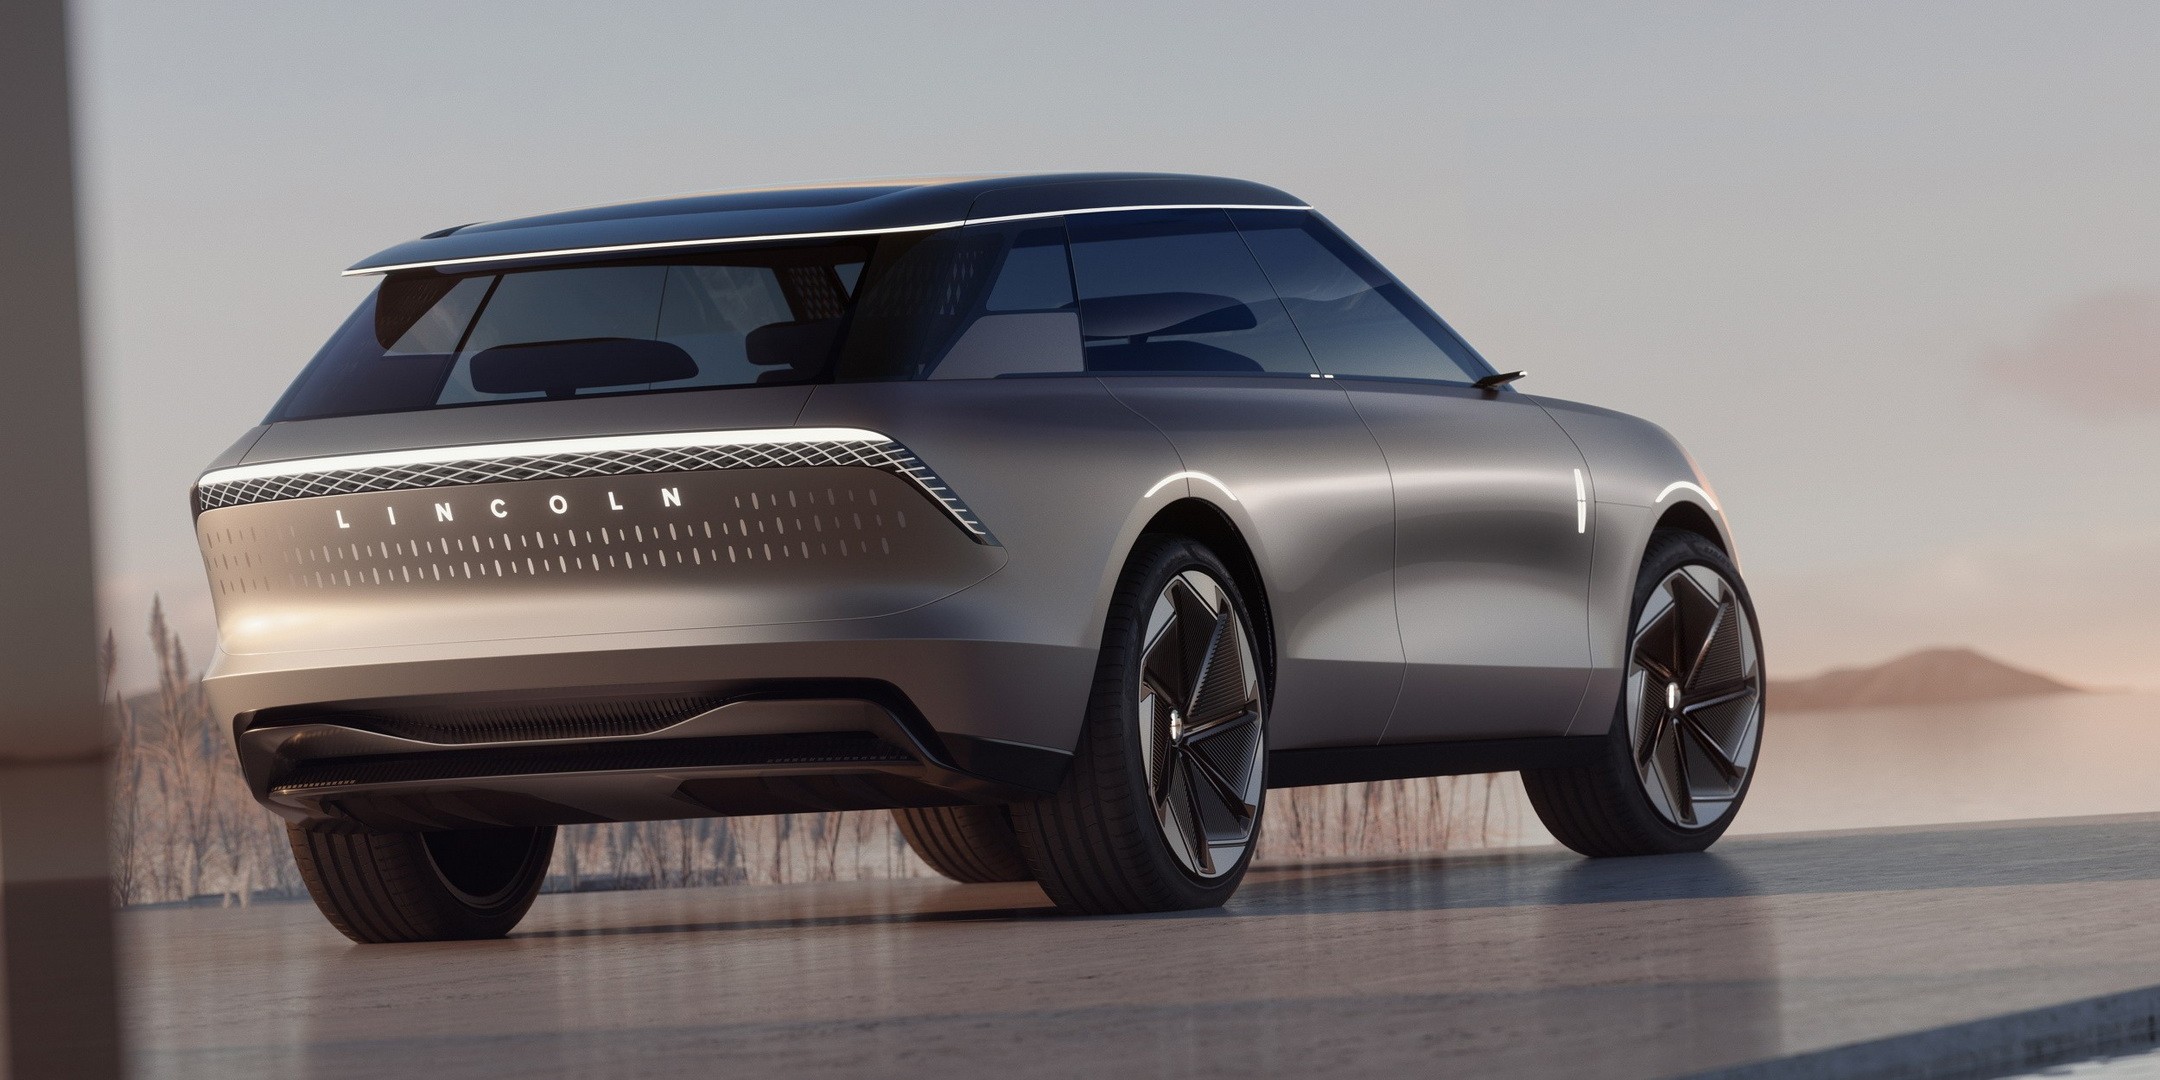 Lincoln Executive Explains the Star Concept, Says It's a Window Into